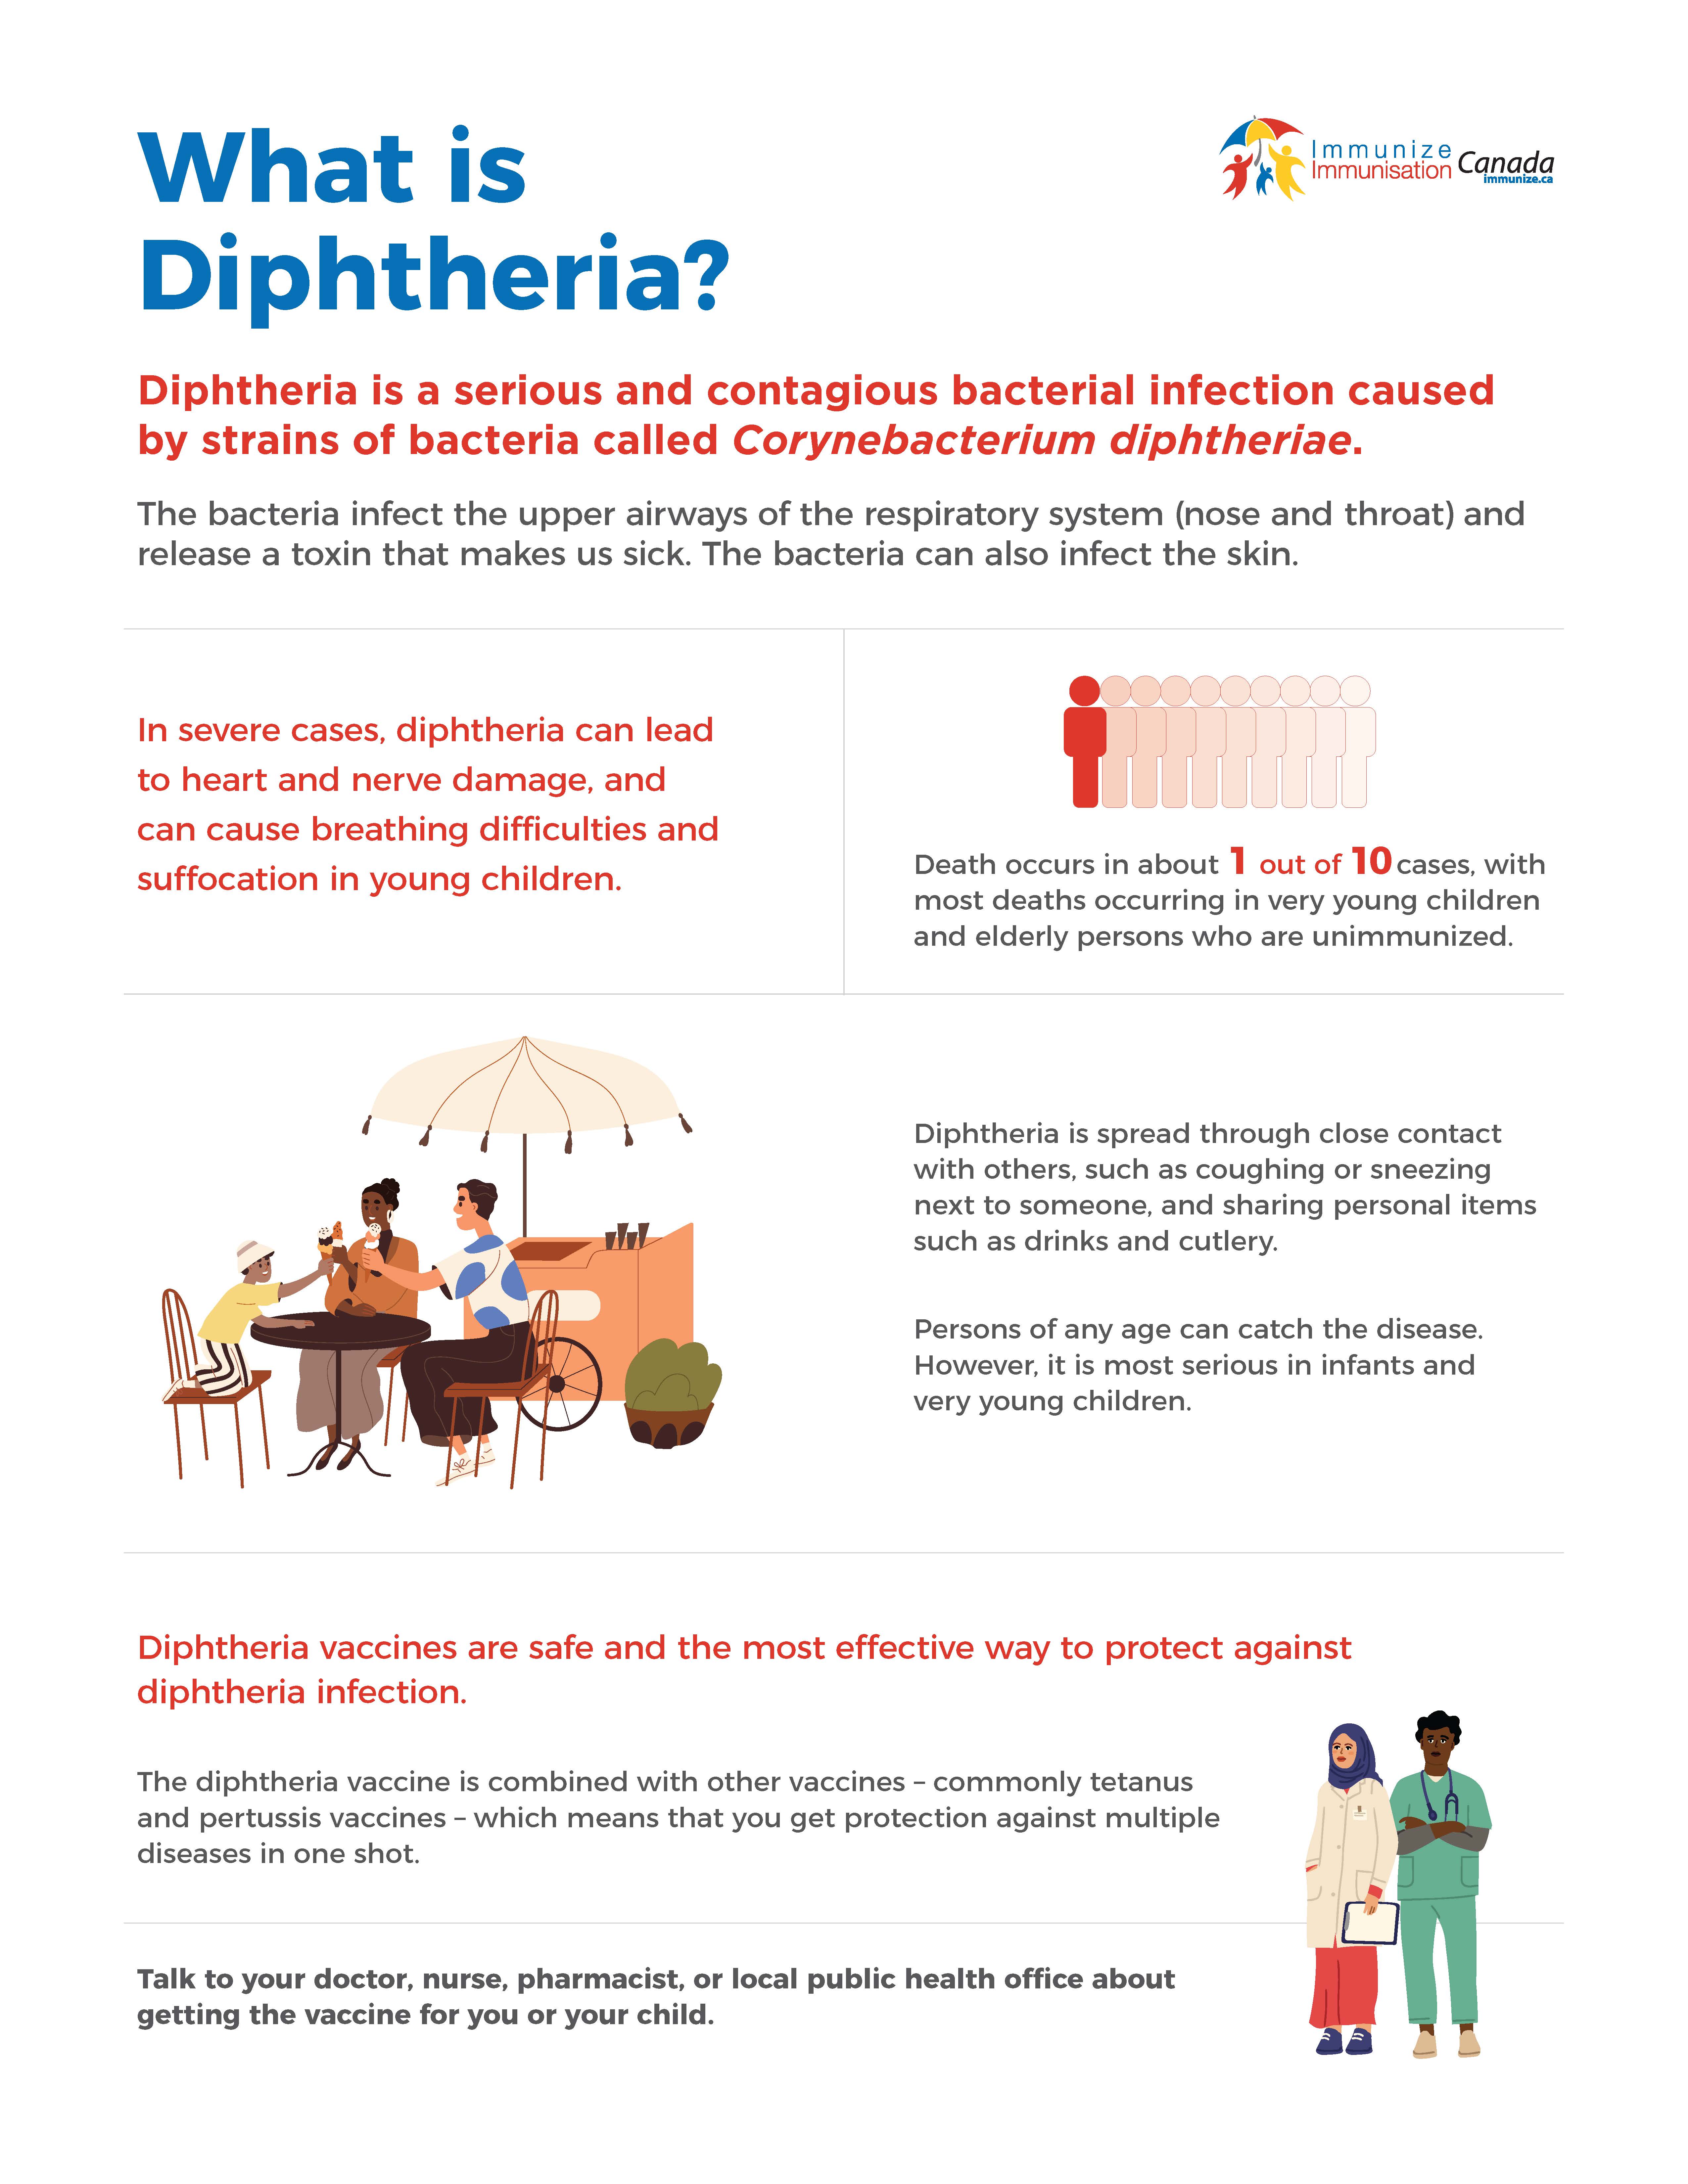 What is diphtheria?